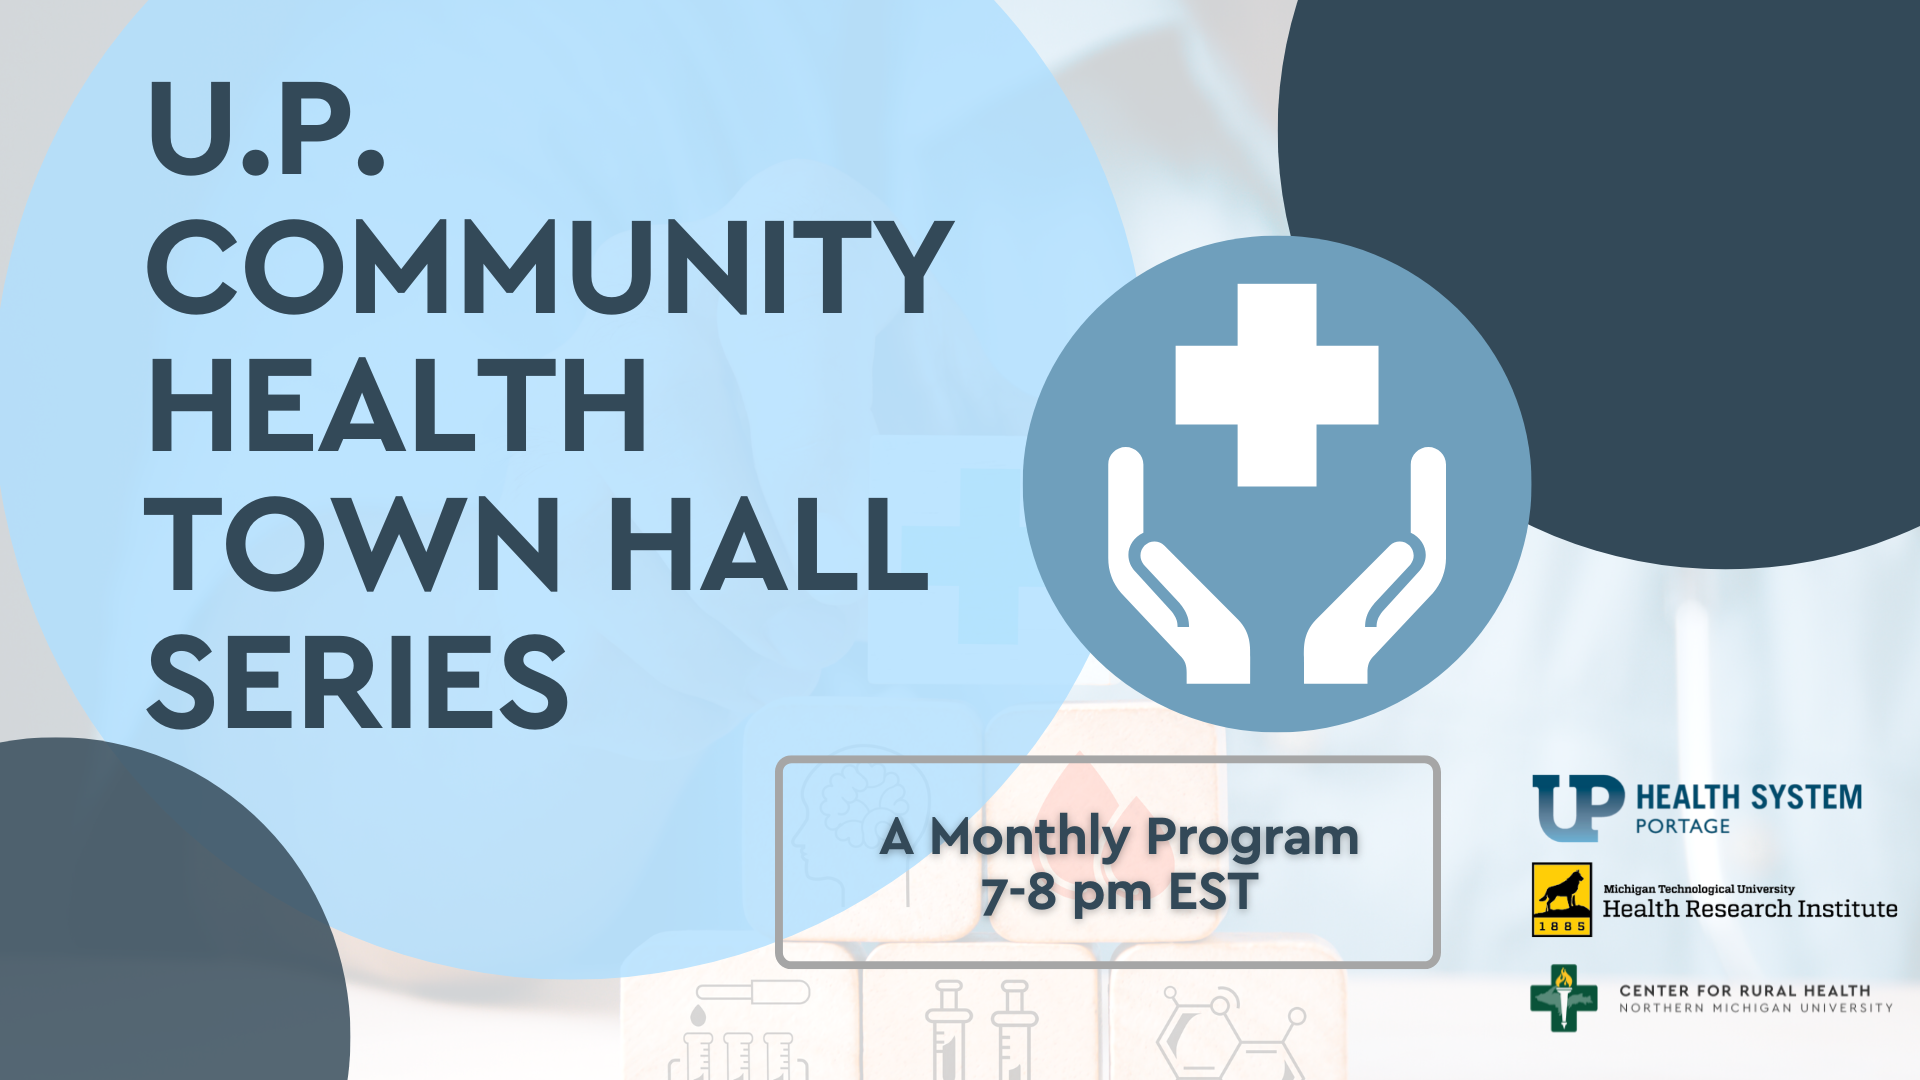 Flyer for the UP Community Health Town Hall Series, a monthly program 7-8 p.m. EST.